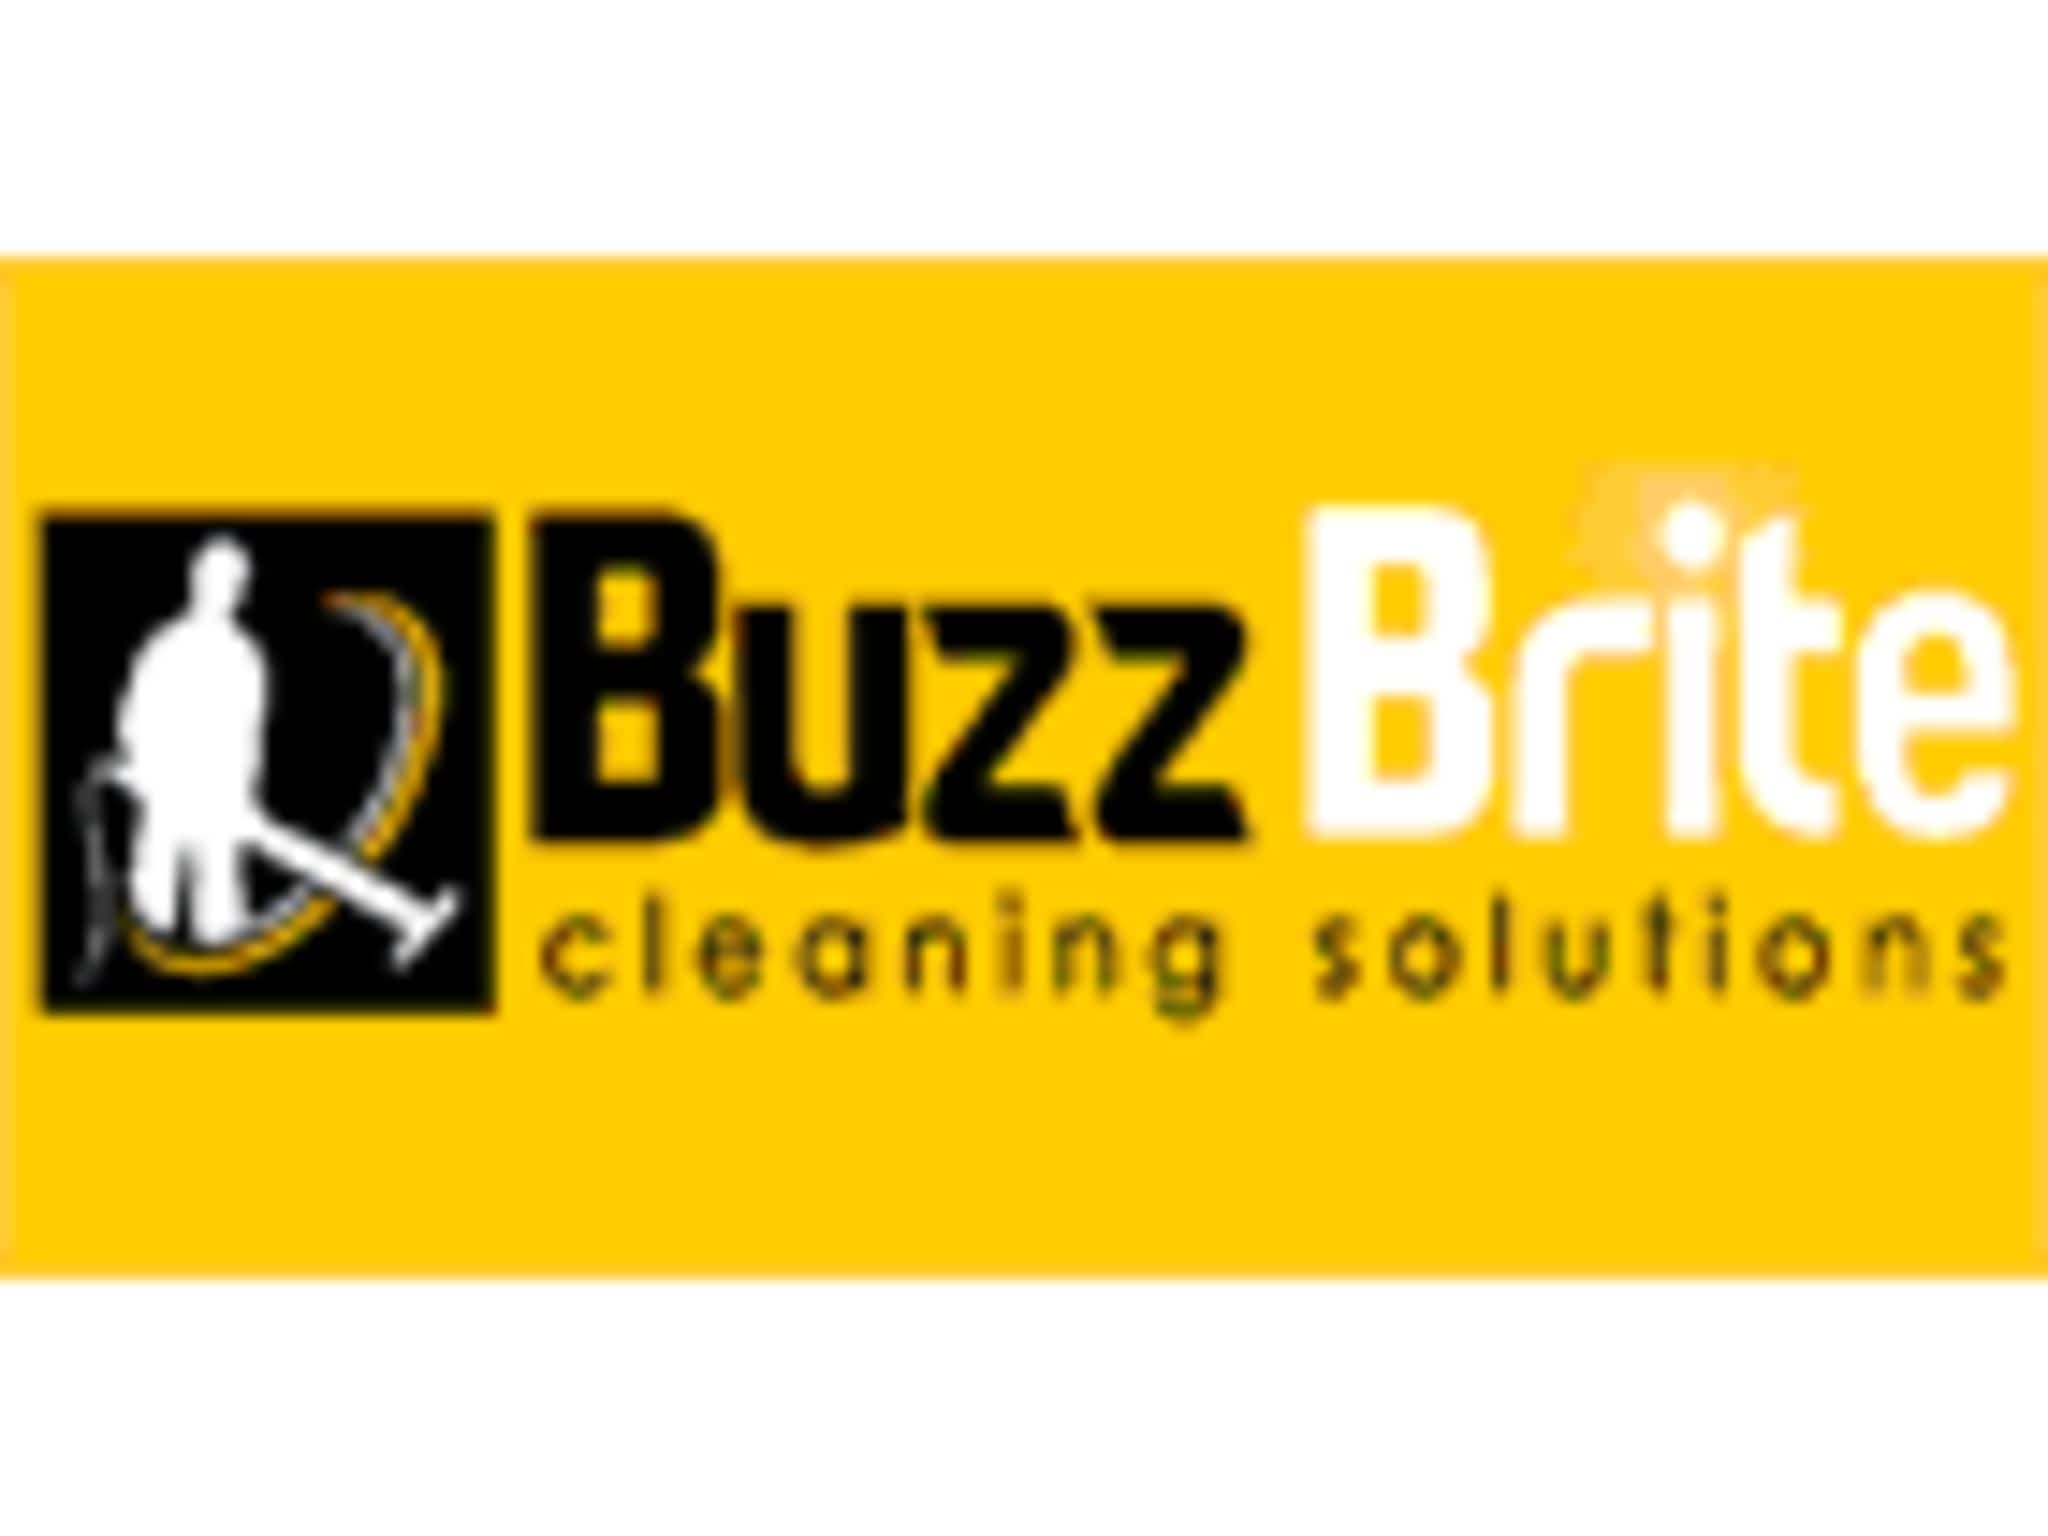 photo Buzz Brite Cleaning Solutions